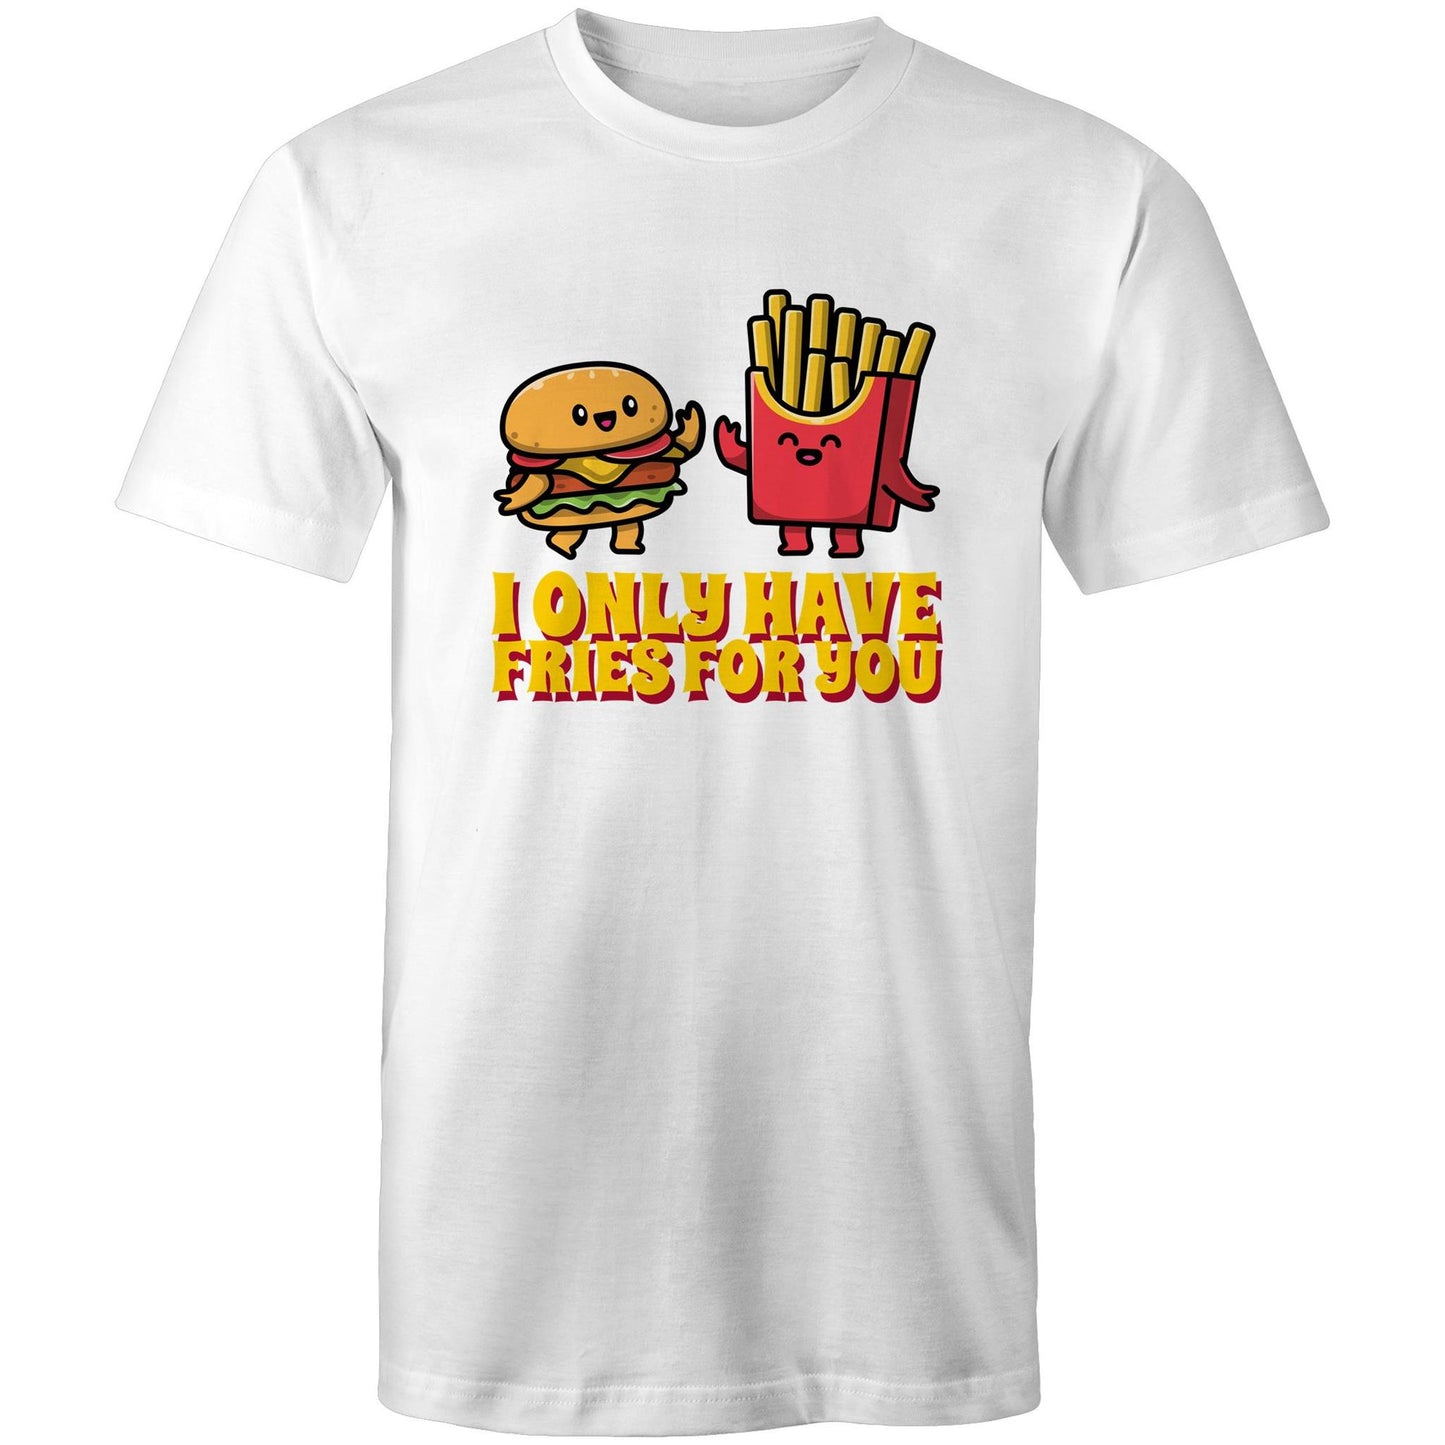 I Only Have Fries For You, Burger And Fries - Mens T-Shirt White Mens T-shirt